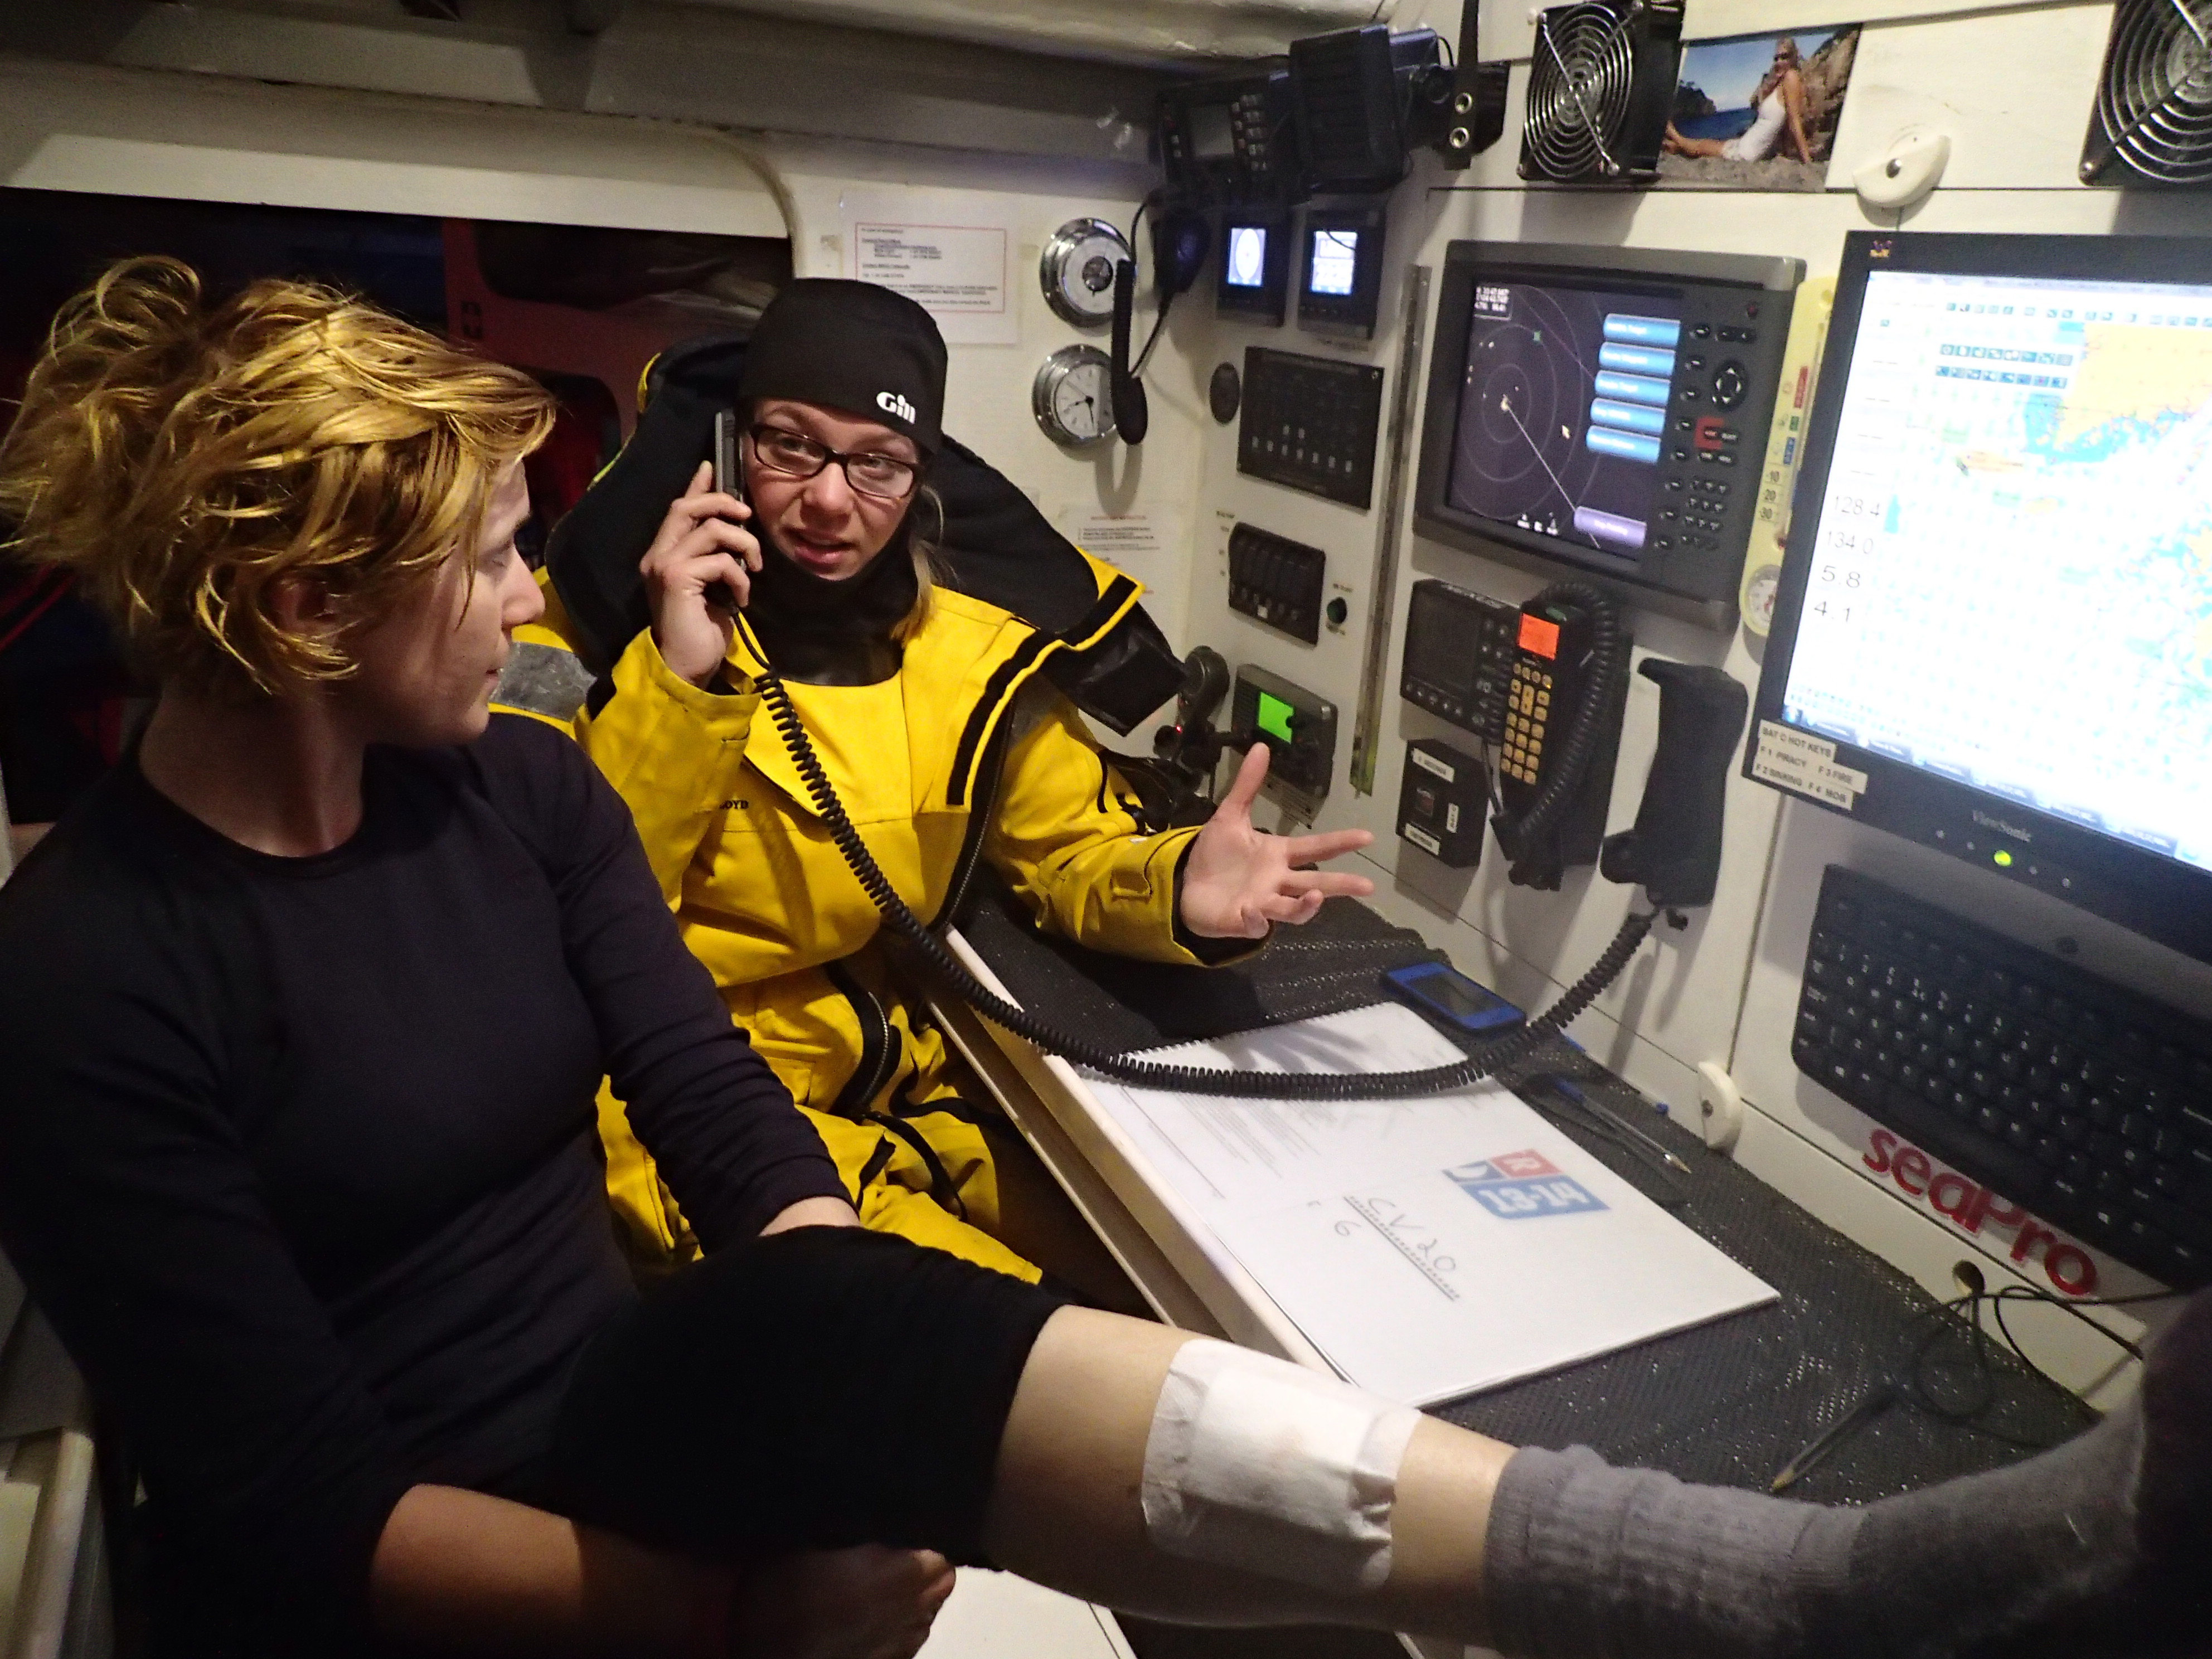 OneDLL crew members from the 2013-14 race receiving telemedic advice from PRAXES 